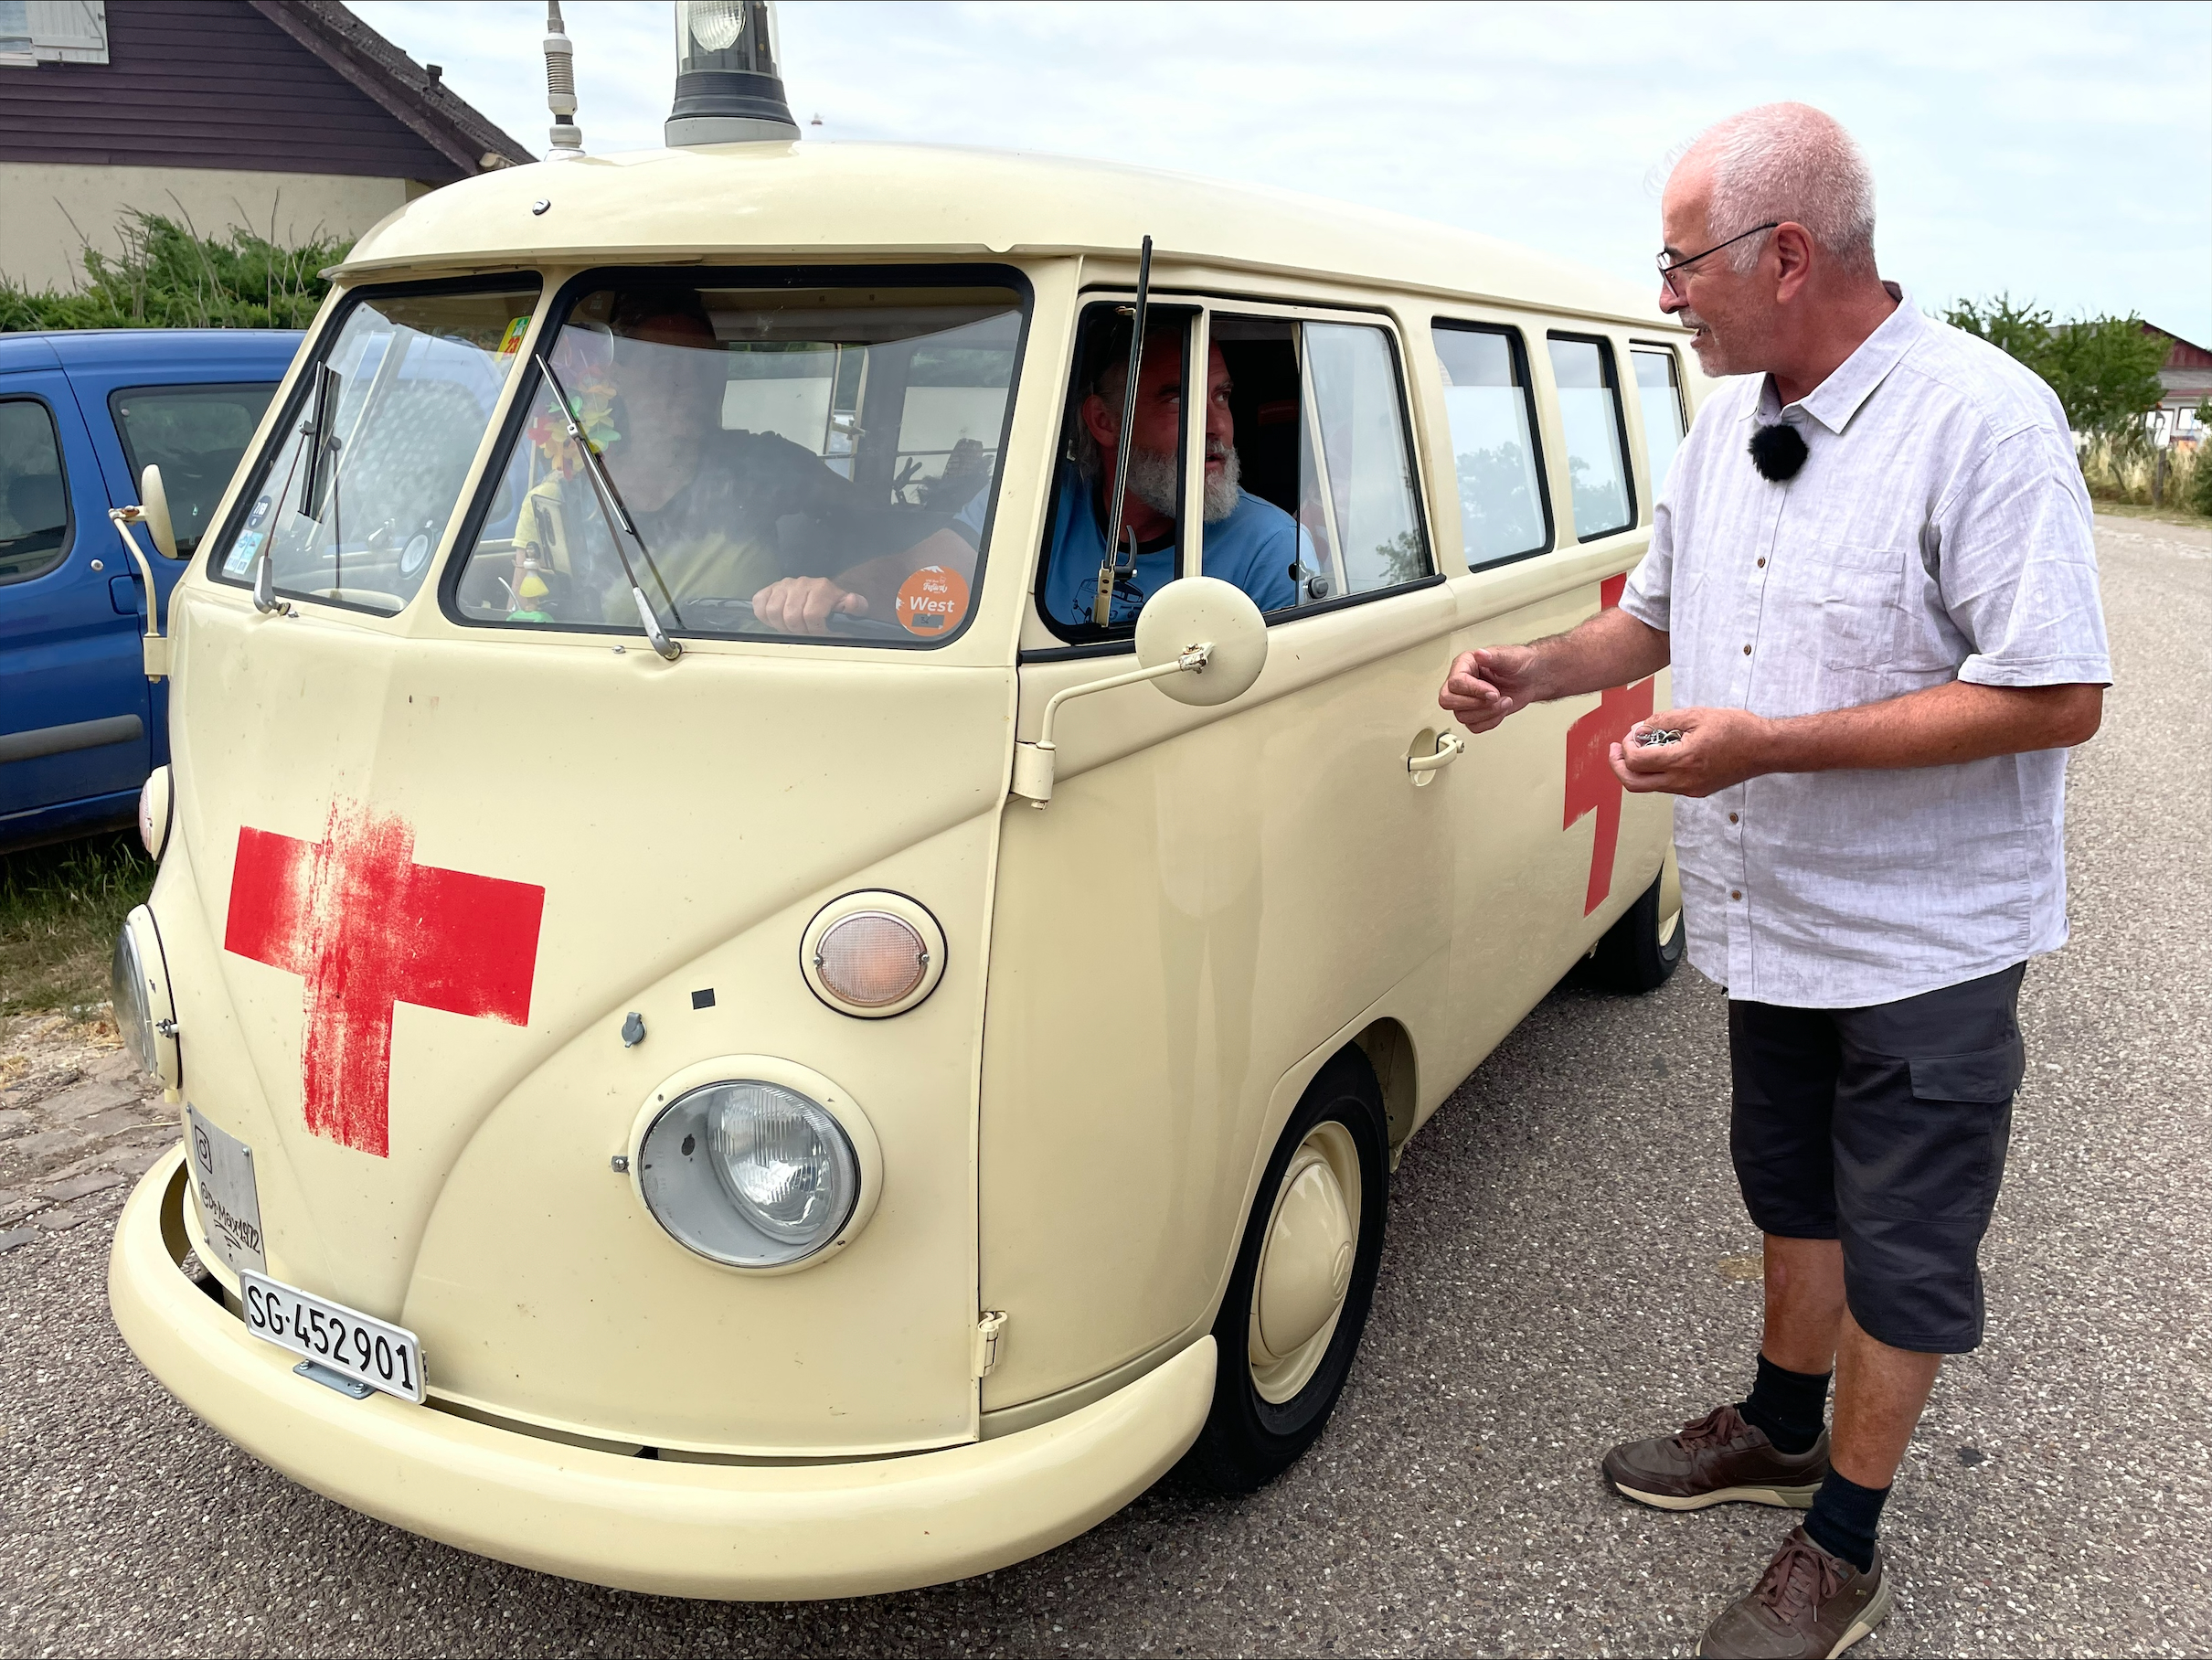 Couple in VW bus and man standing next to it